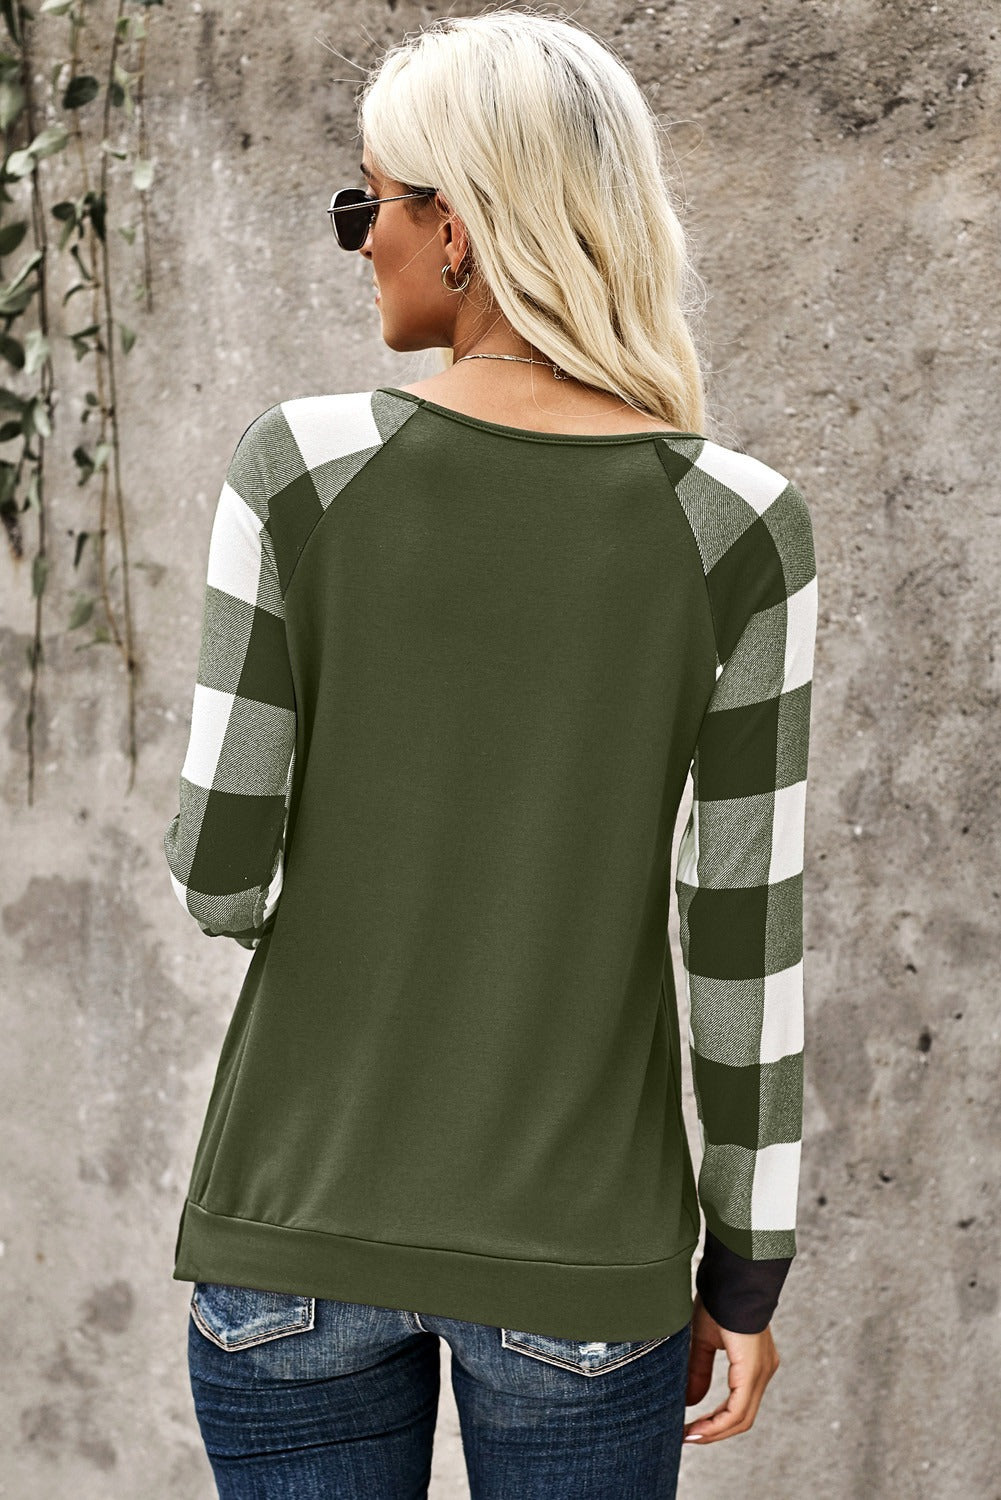 Green Plaid Splicing Sequined Pocket Long Sleeve Top